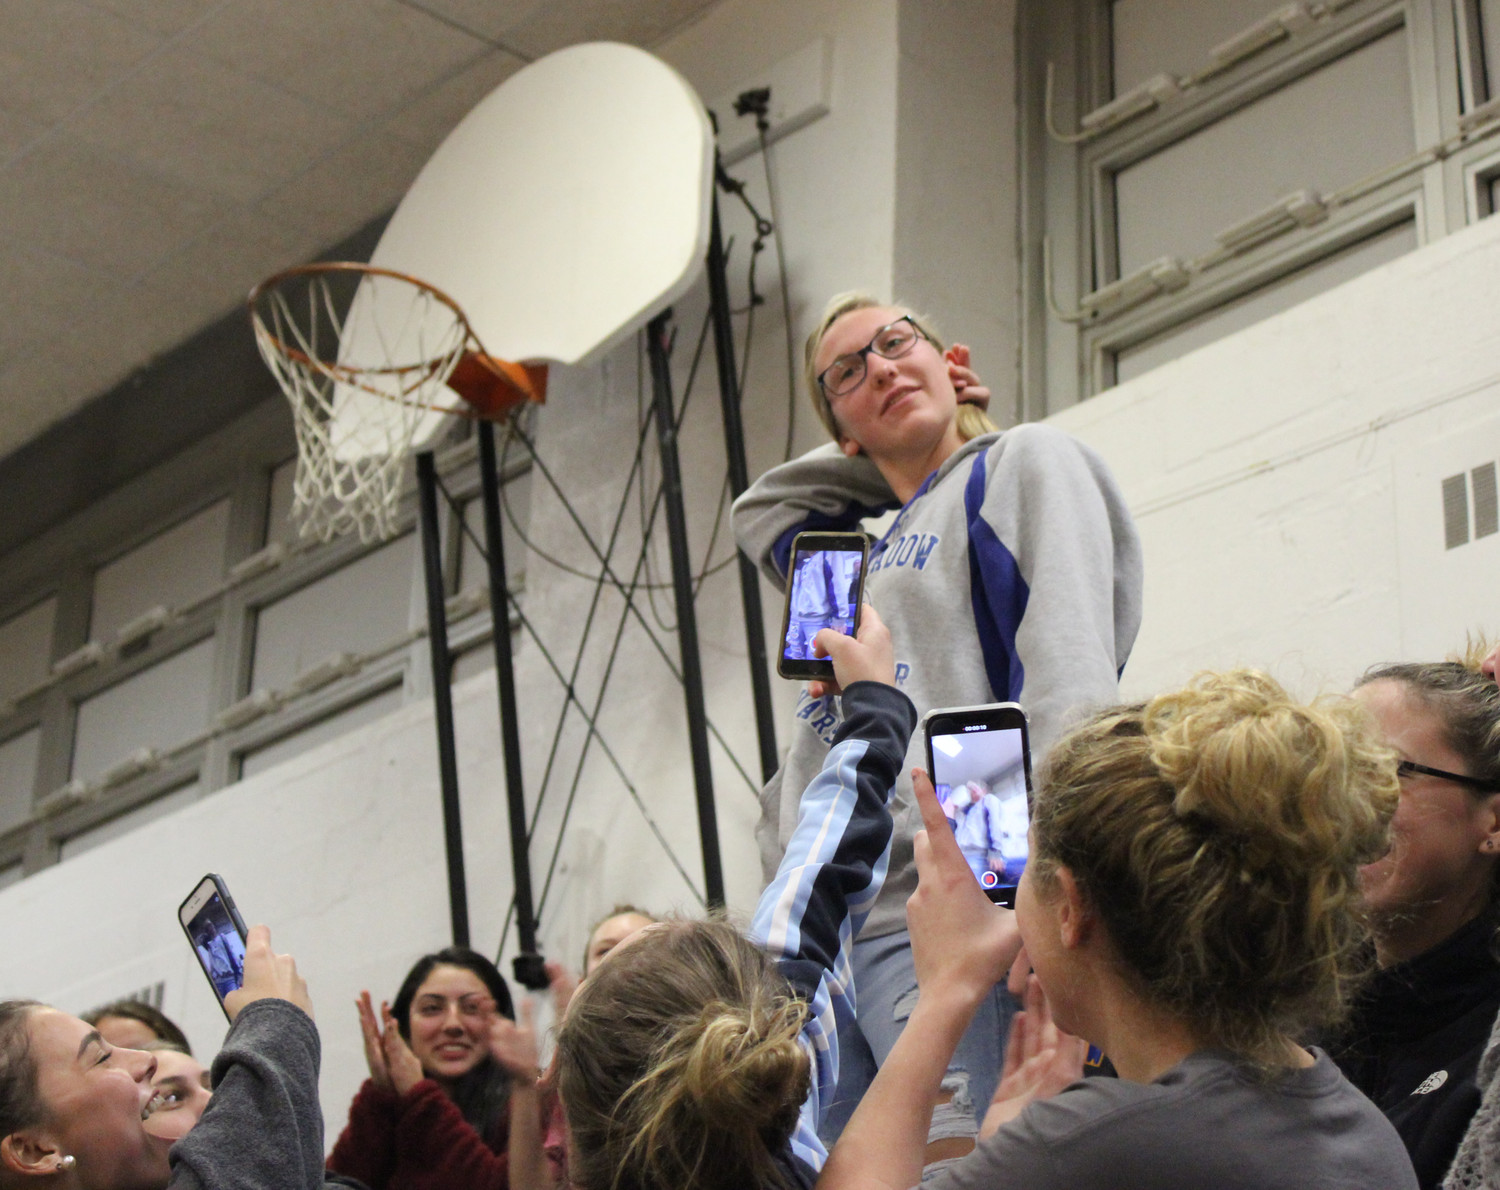 Stephanie Sparkowski believed she was simply cheering on the East Meadow High School boys’ basketball team when the athletic department surprised her with a national honor.